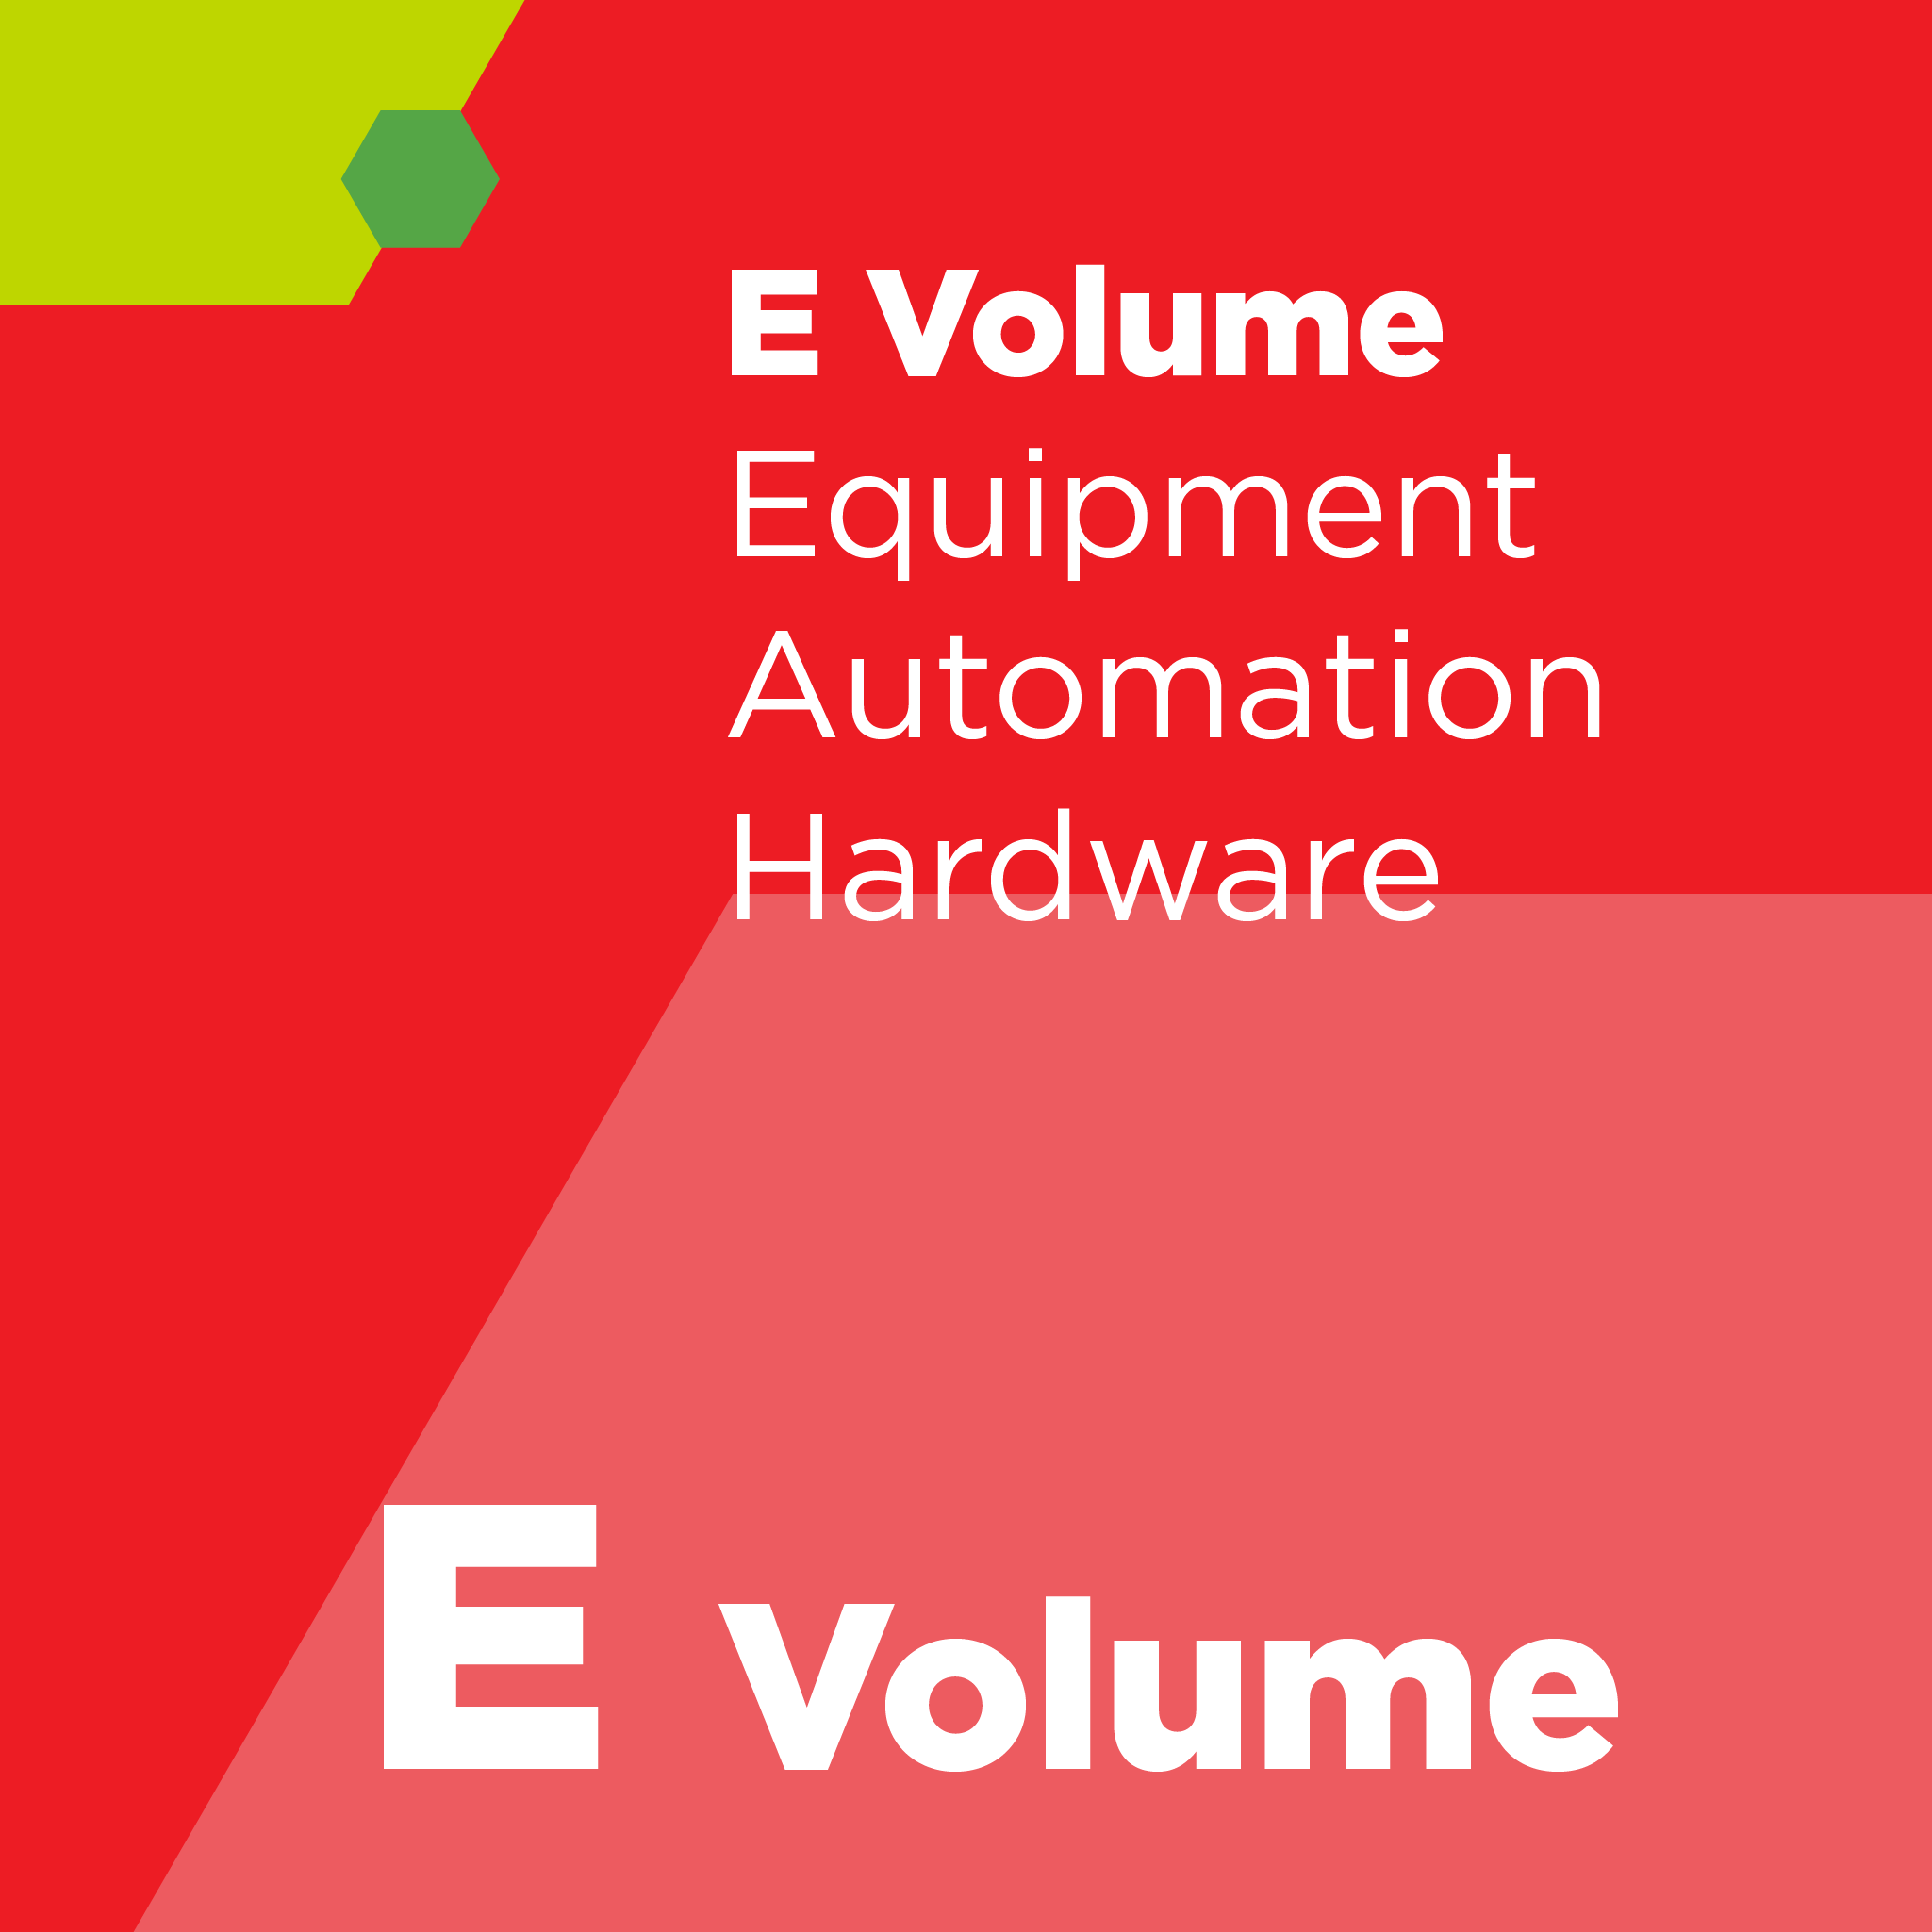 E07200 - SEMI E72 - Specification and Guide for Equipment Footprint, Height, and Weight